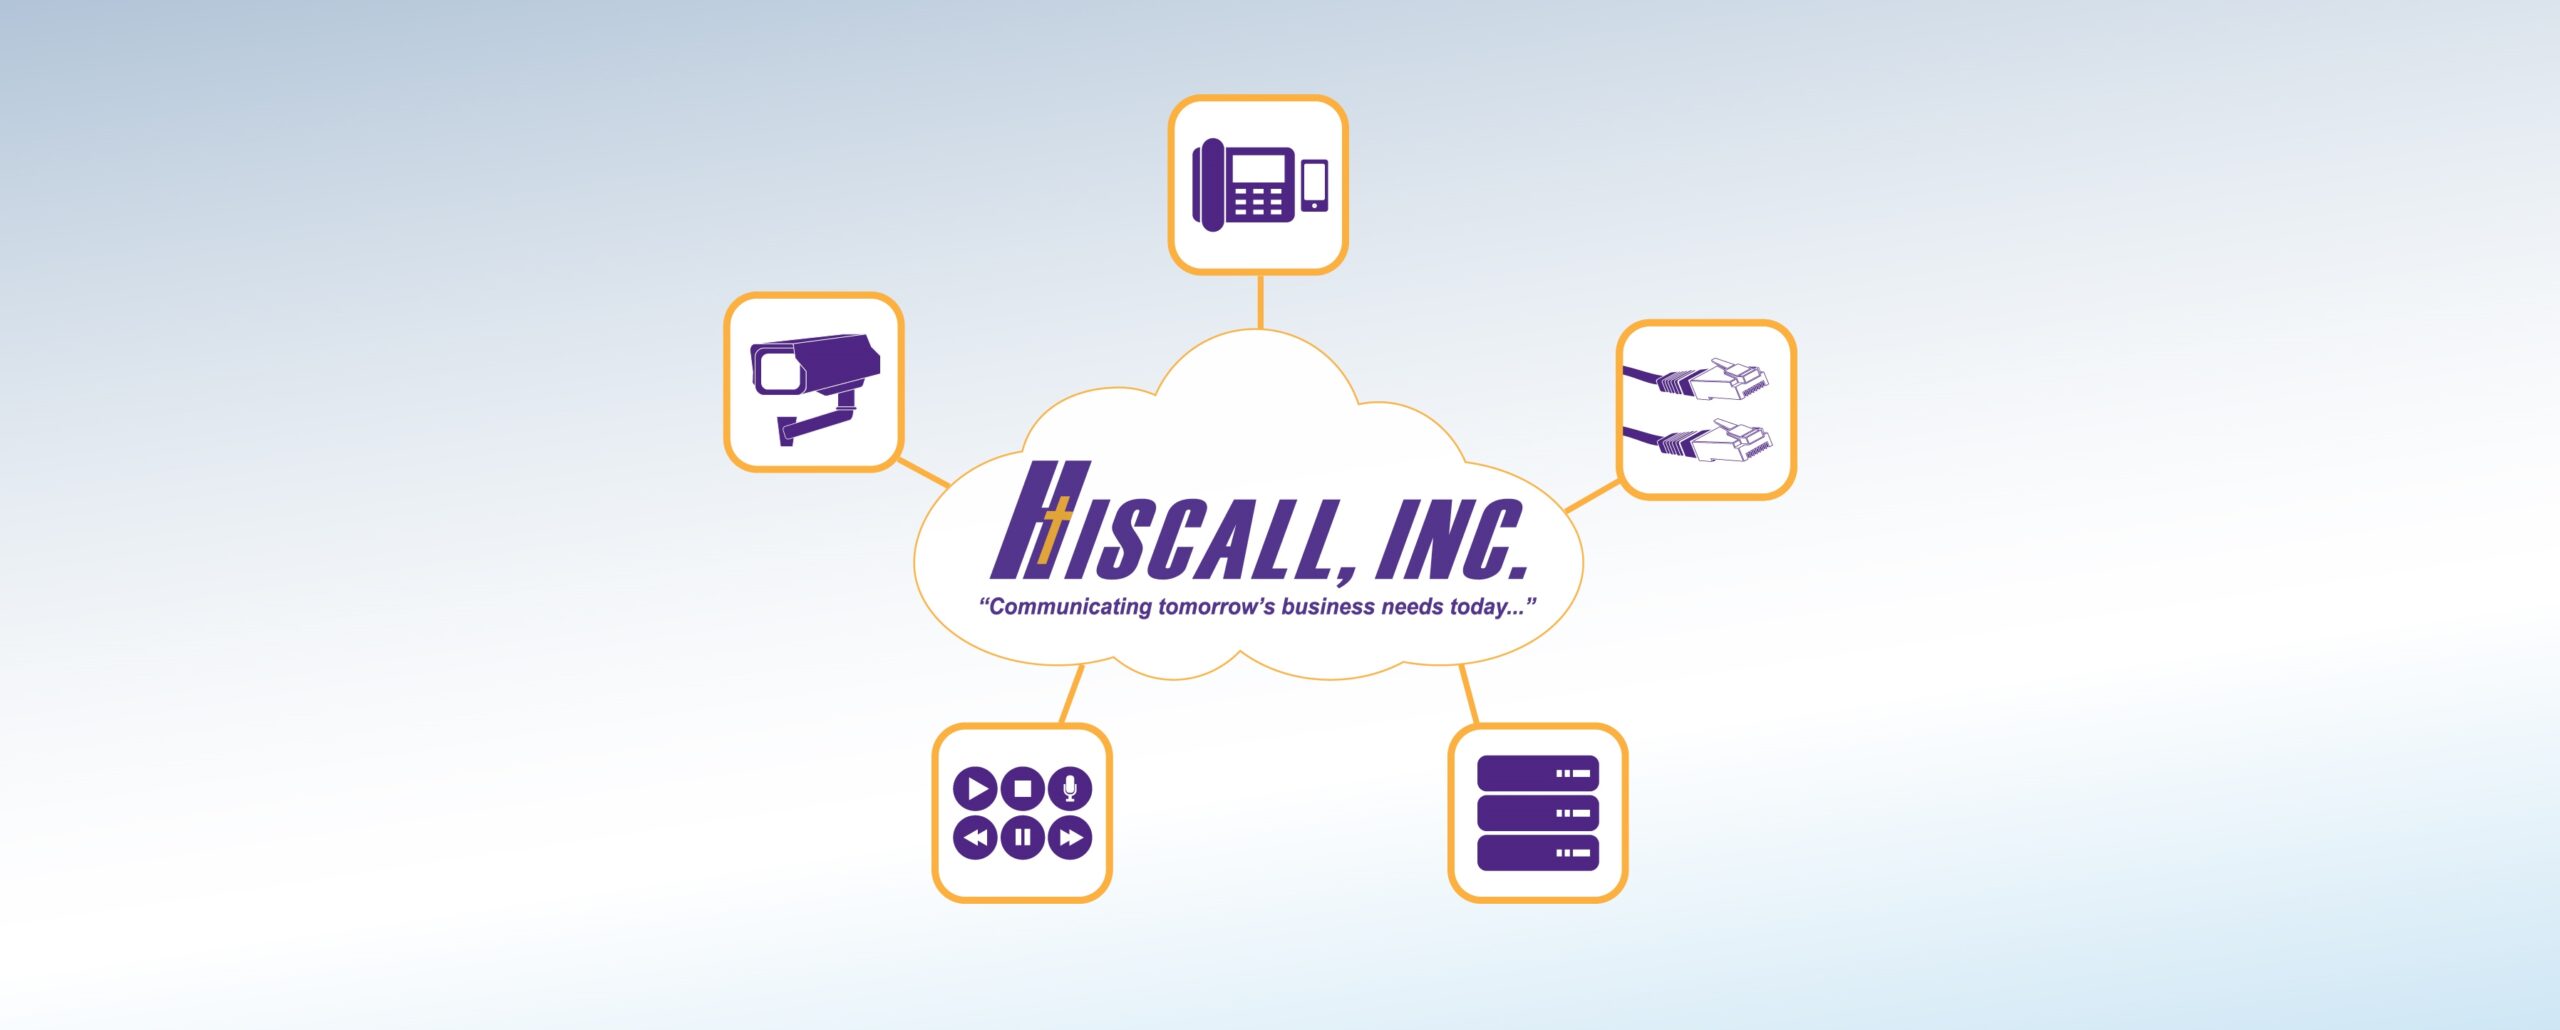 Exciting Cloud Announcement from Hiscall!